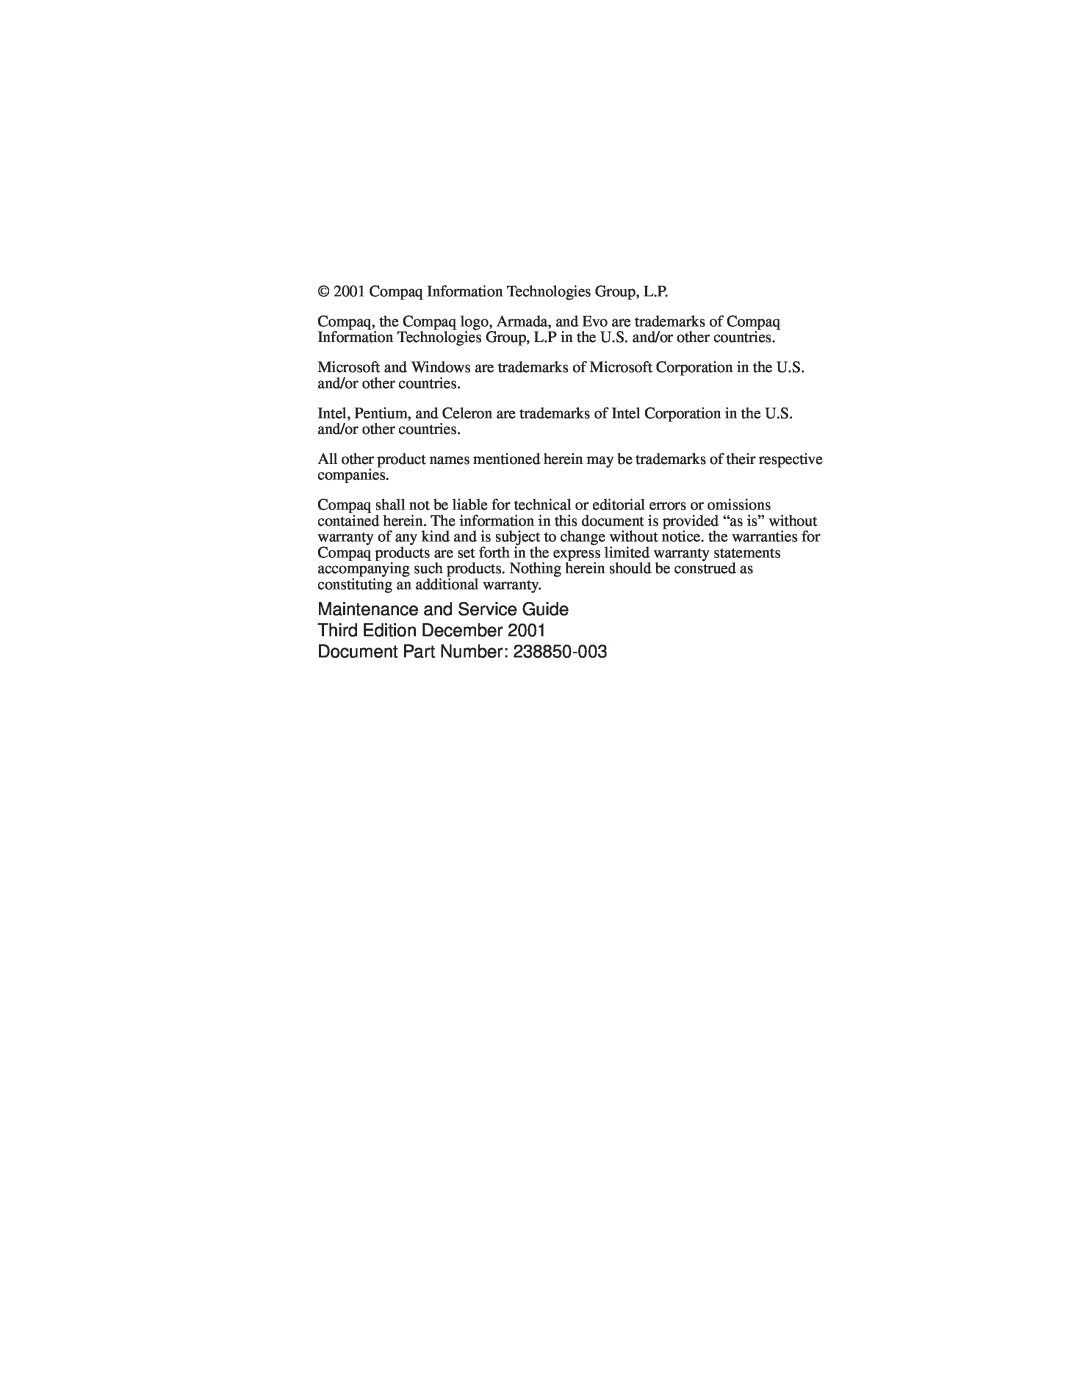 Compaq N110 manual Maintenance and Service Guide Third Edition December, Document Part Number 